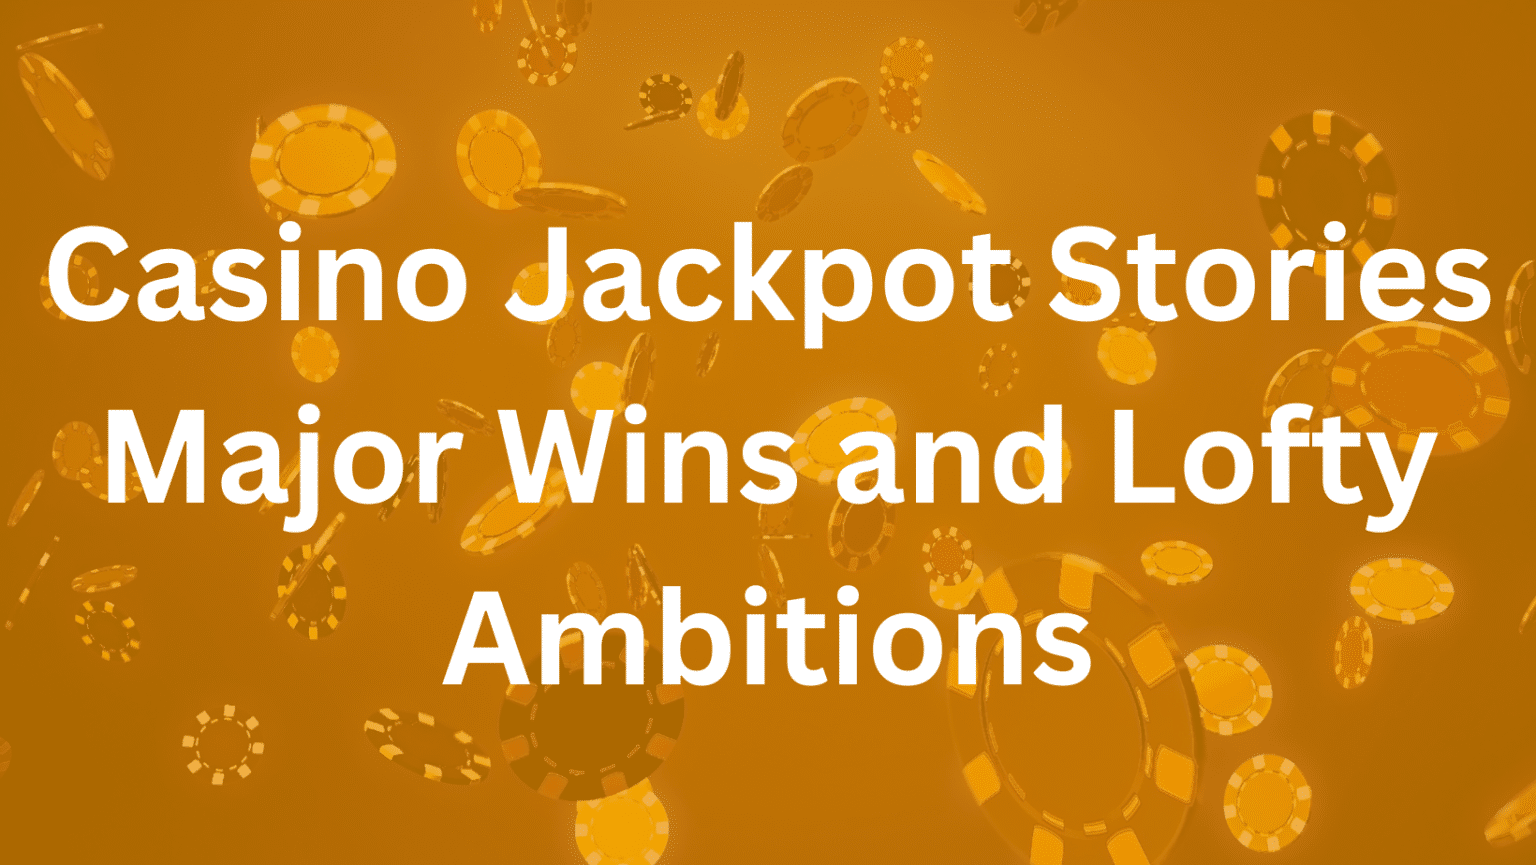 Casino Jackpot Stories Major Wins and Lofty Ambitions